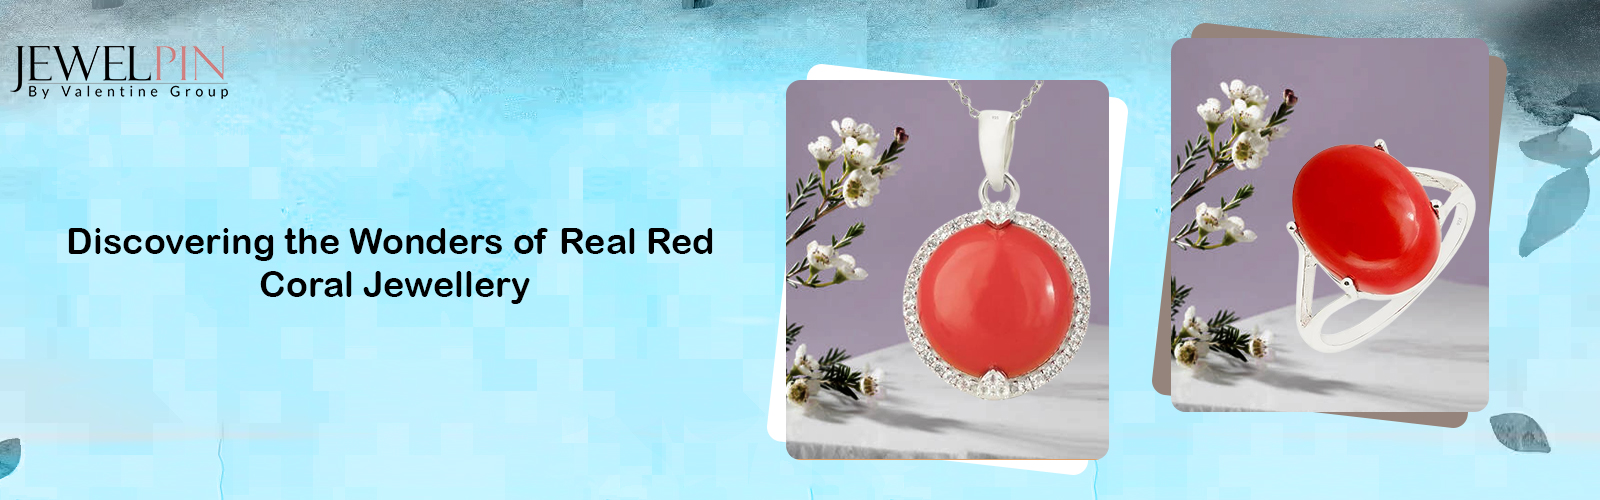  the Wonders of Real Red Coral Jewellery